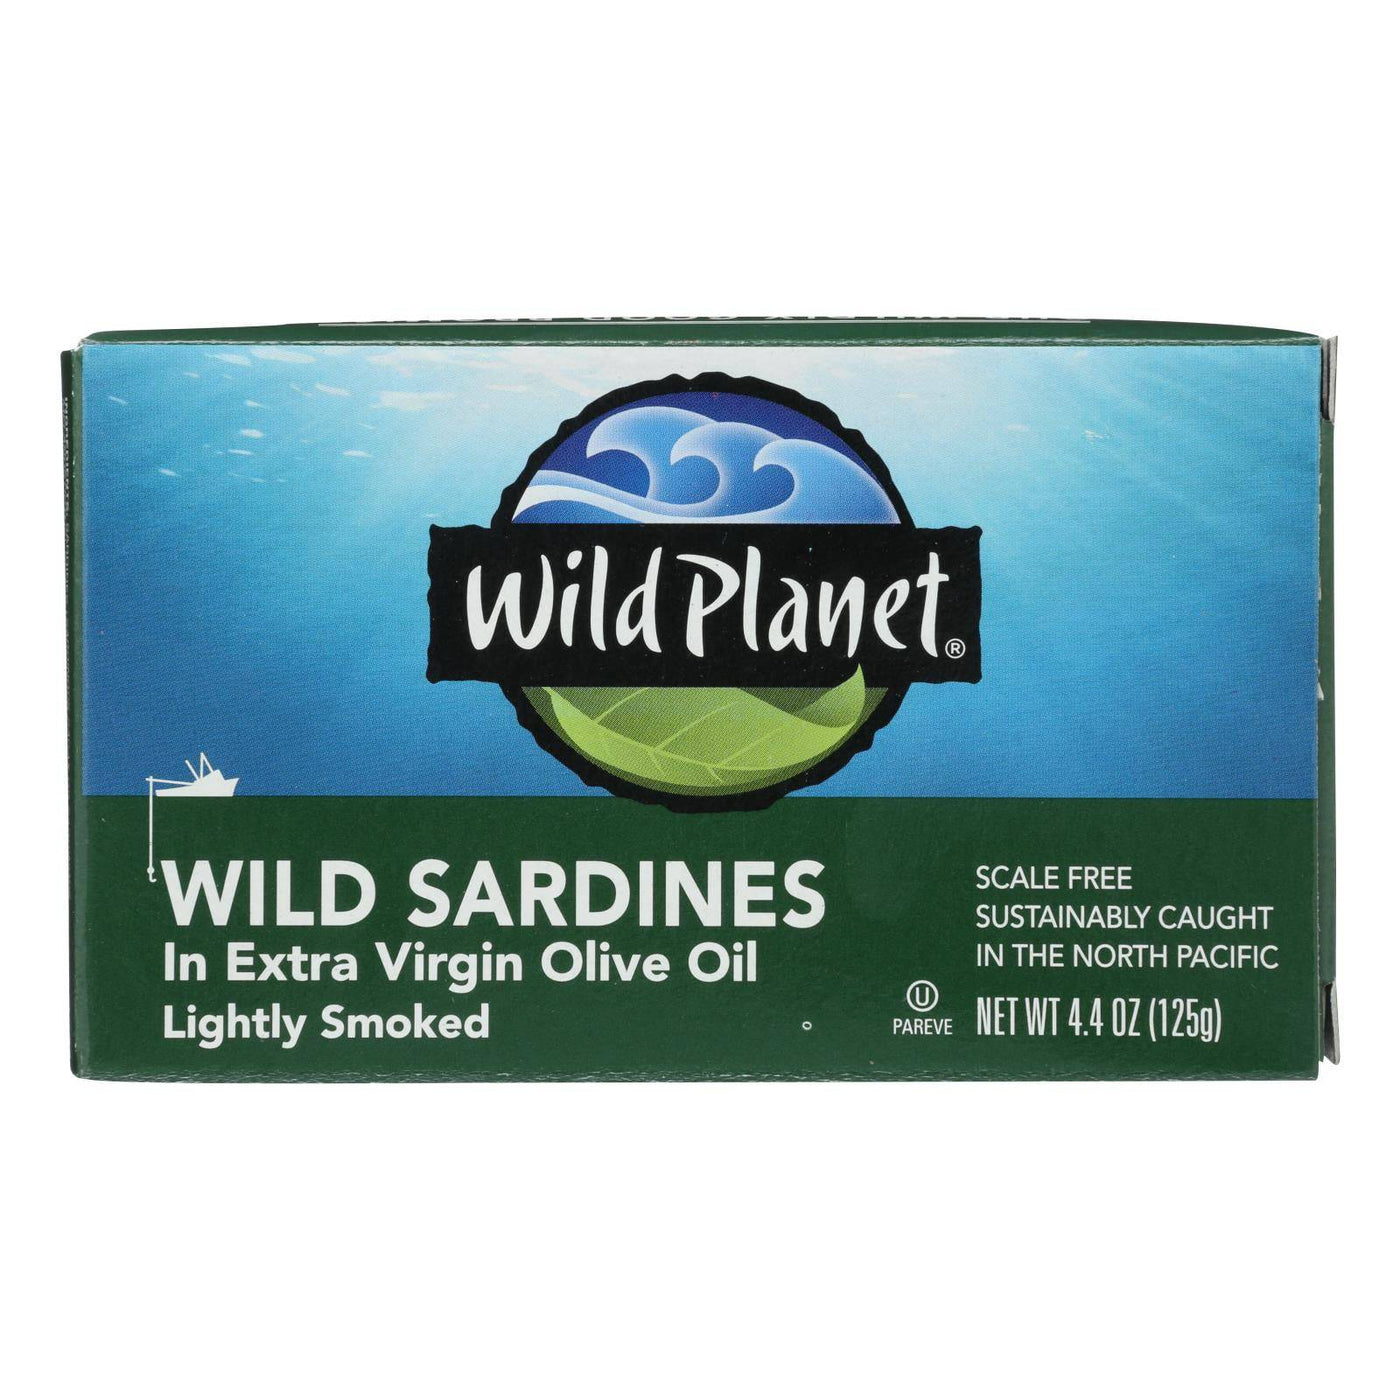 Buy Wild Planet Wild Sardines In Extra Virgin Olive Oil - Case Of 12 - 4.375 Oz.  at OnlyNaturals.us